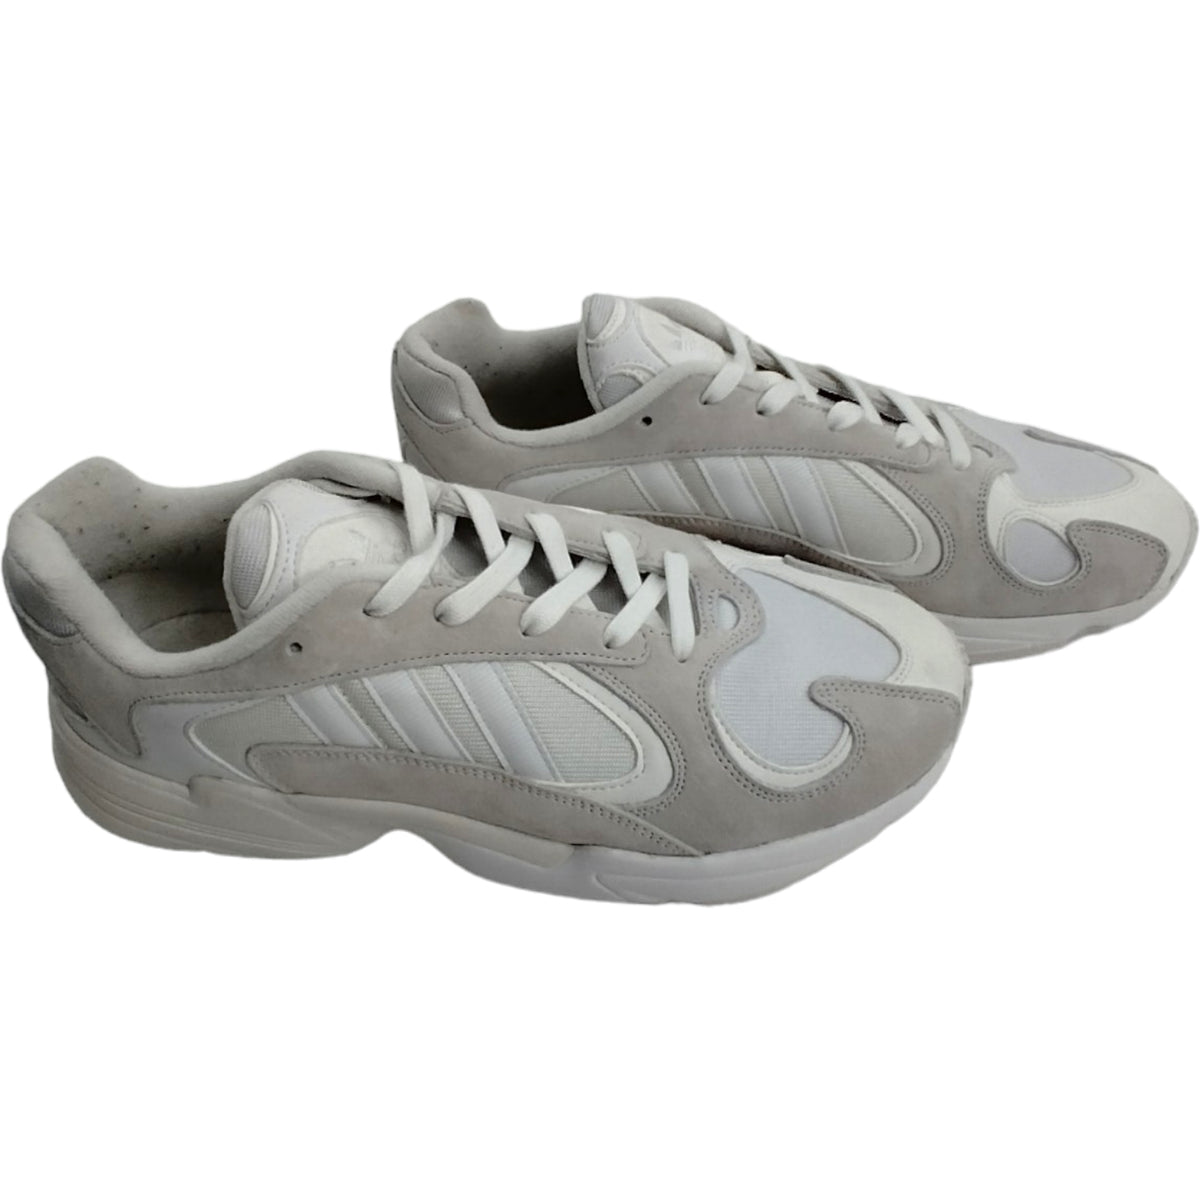 Adidas Chalk White Yung 1 Trainers